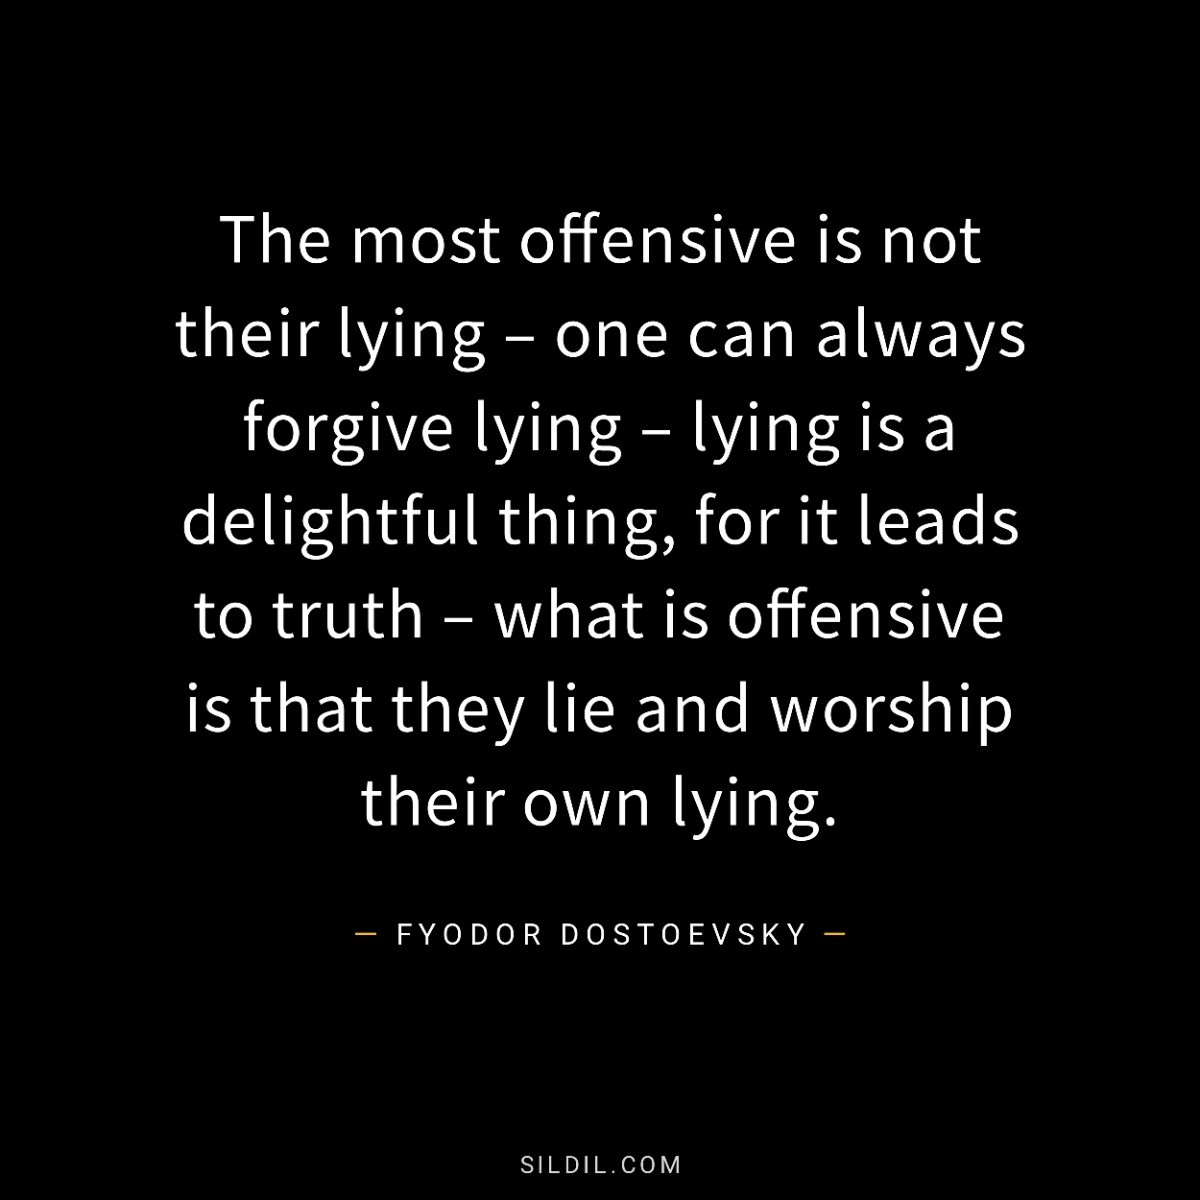 The most offensive is not their lying – one can always forgive lying – lying is a delightful thing, for it leads to truth – what is offensive is that they lie and worship their own lying.